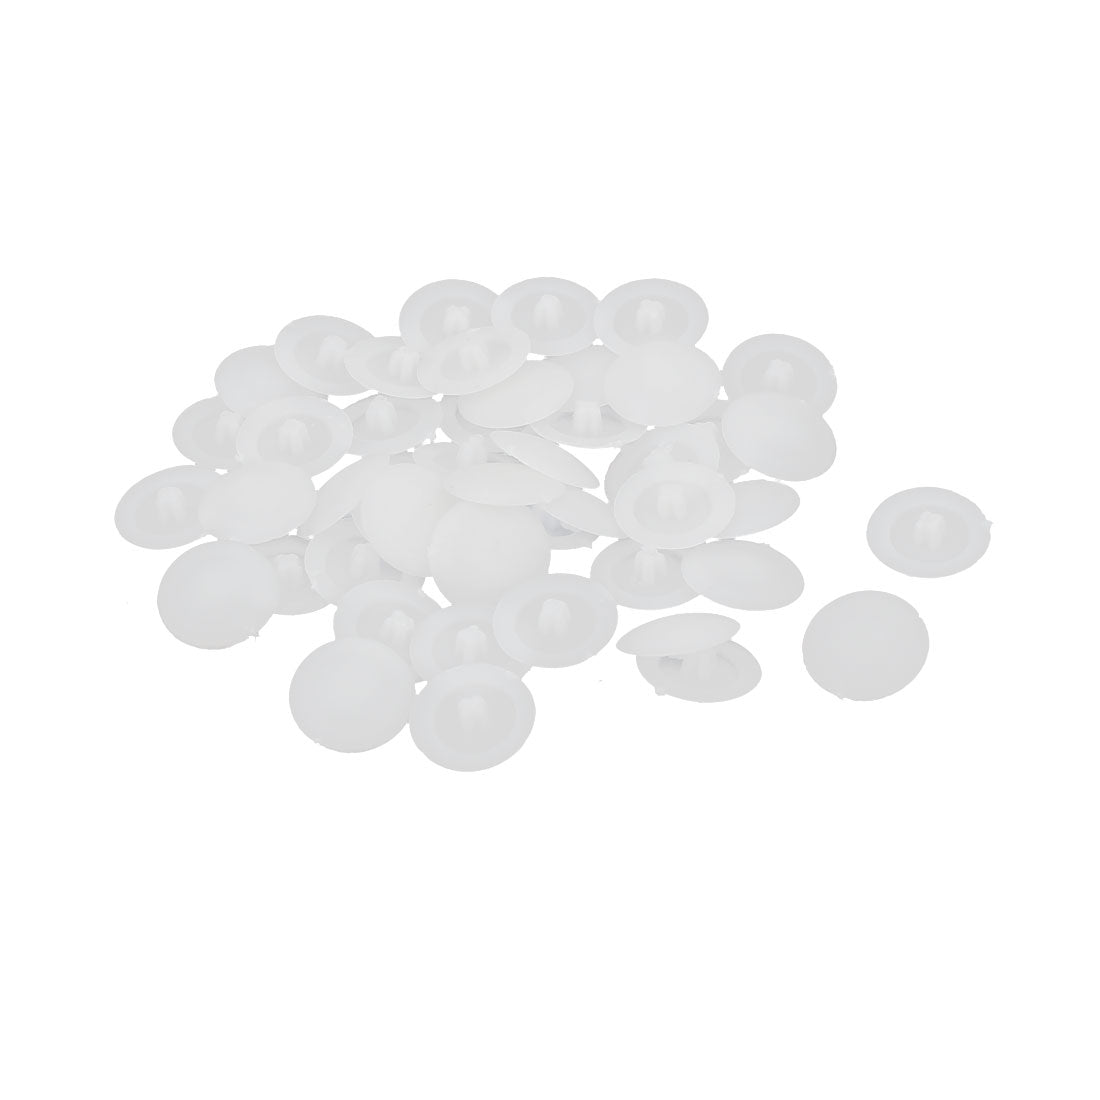 uxcell Uxcell 12mm Dia Plastic Phillips Screw Cap Hole Plugs Dust Proof Covers White 50pcs